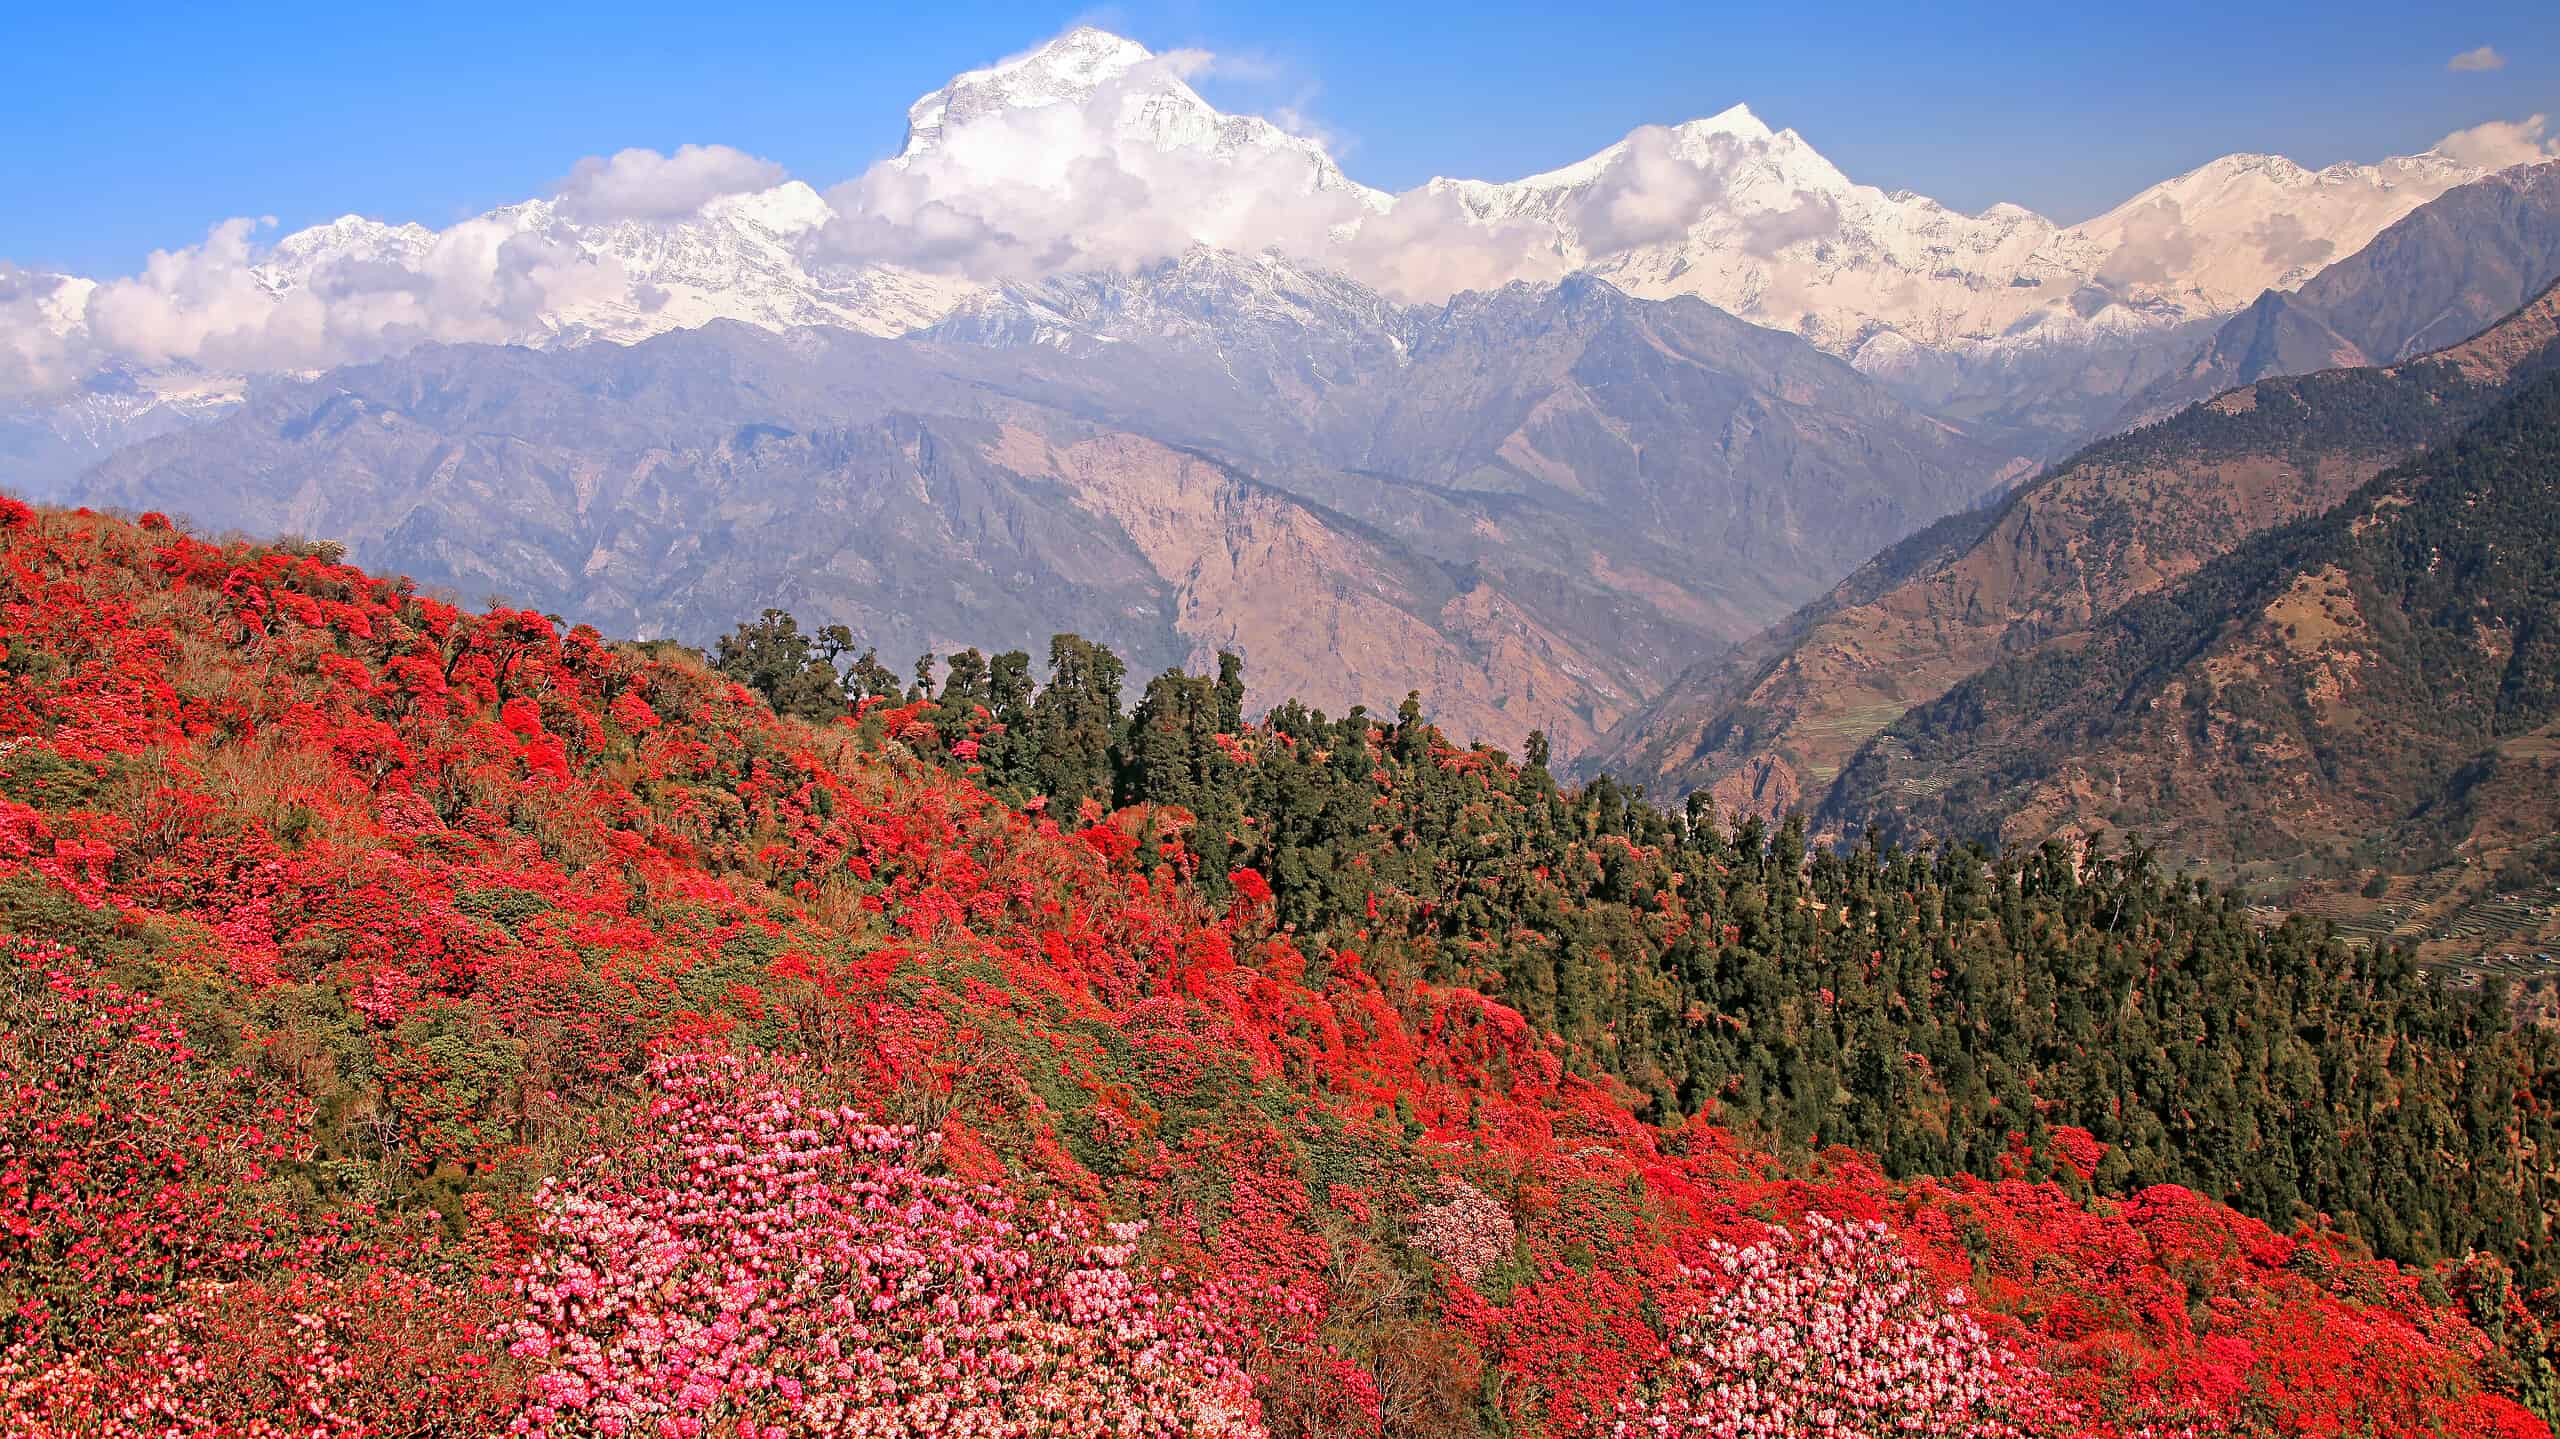 Blooming rhododendron grove on the background of the snow Dhaulagiri peak (8167 m). Himalayas, Nepal.